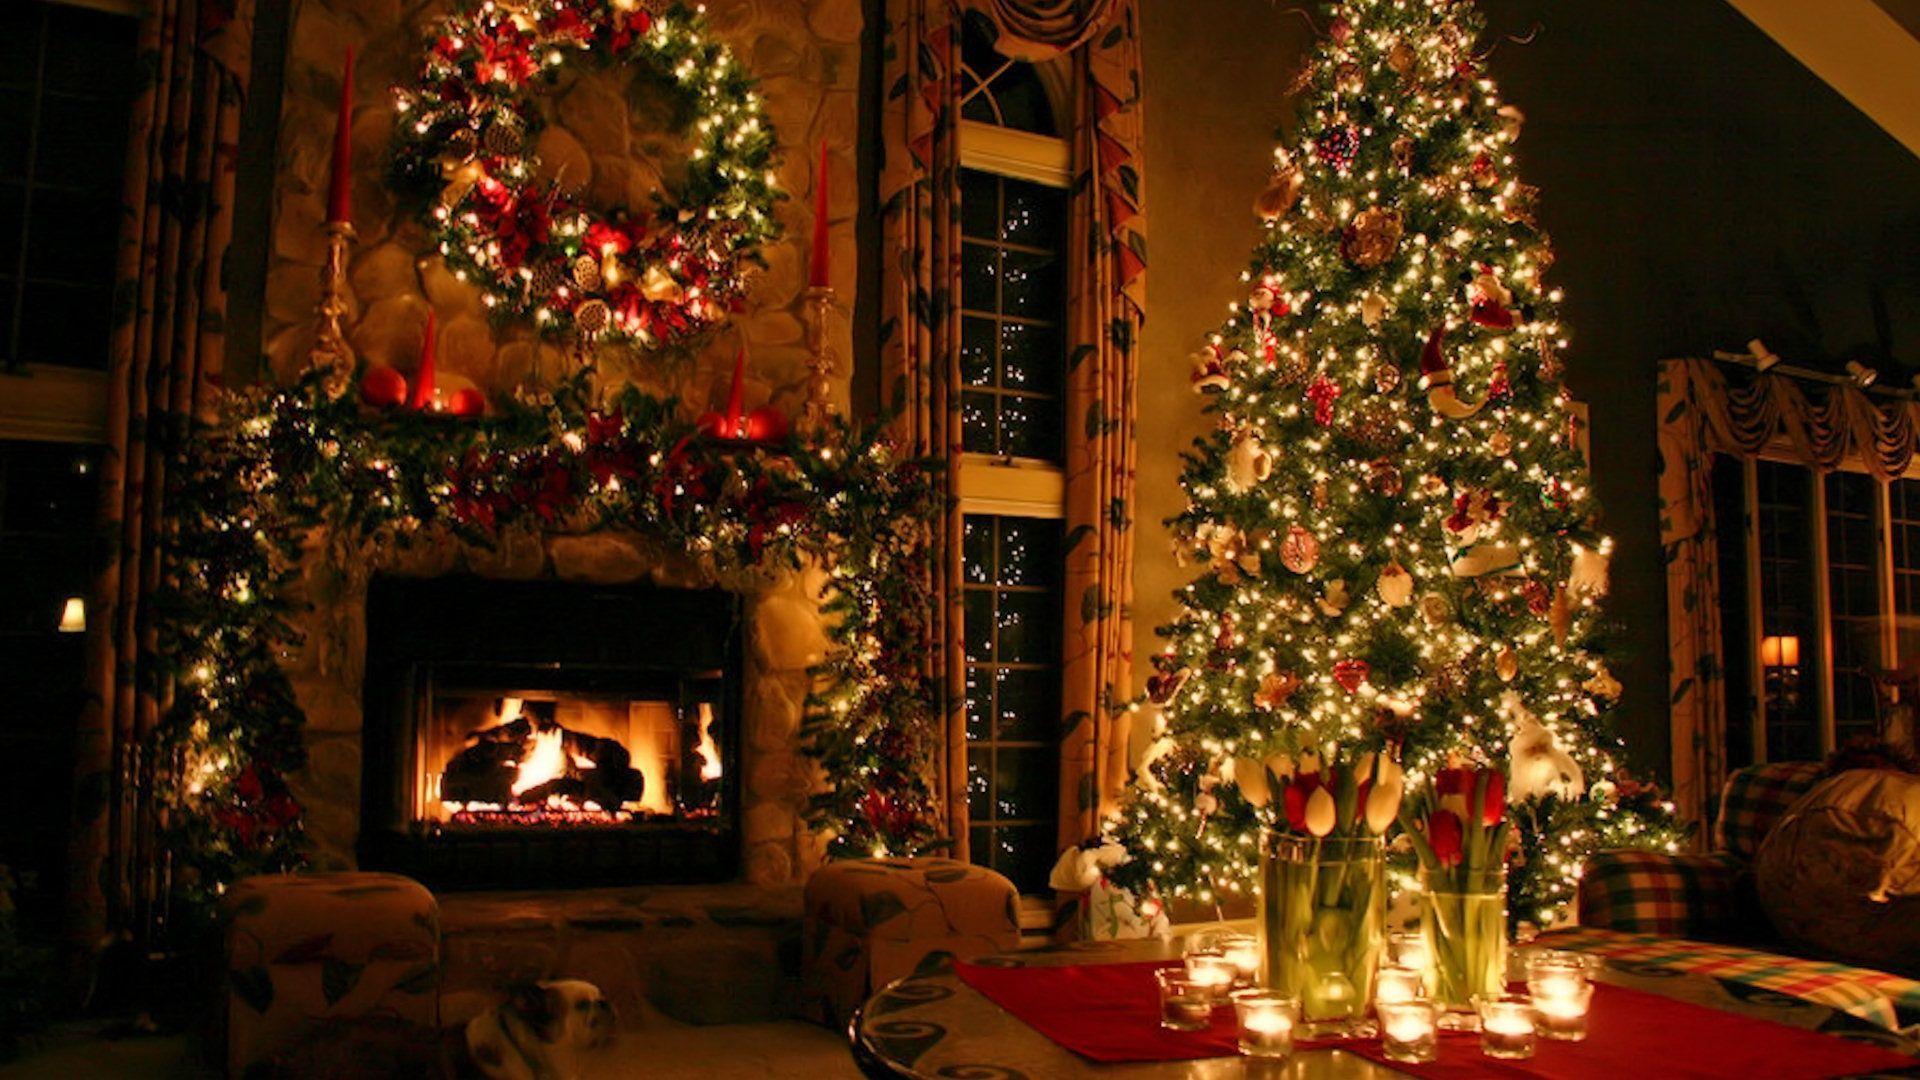 Cozy Christmas Wallpaper 1920x1080 Christmas Picture